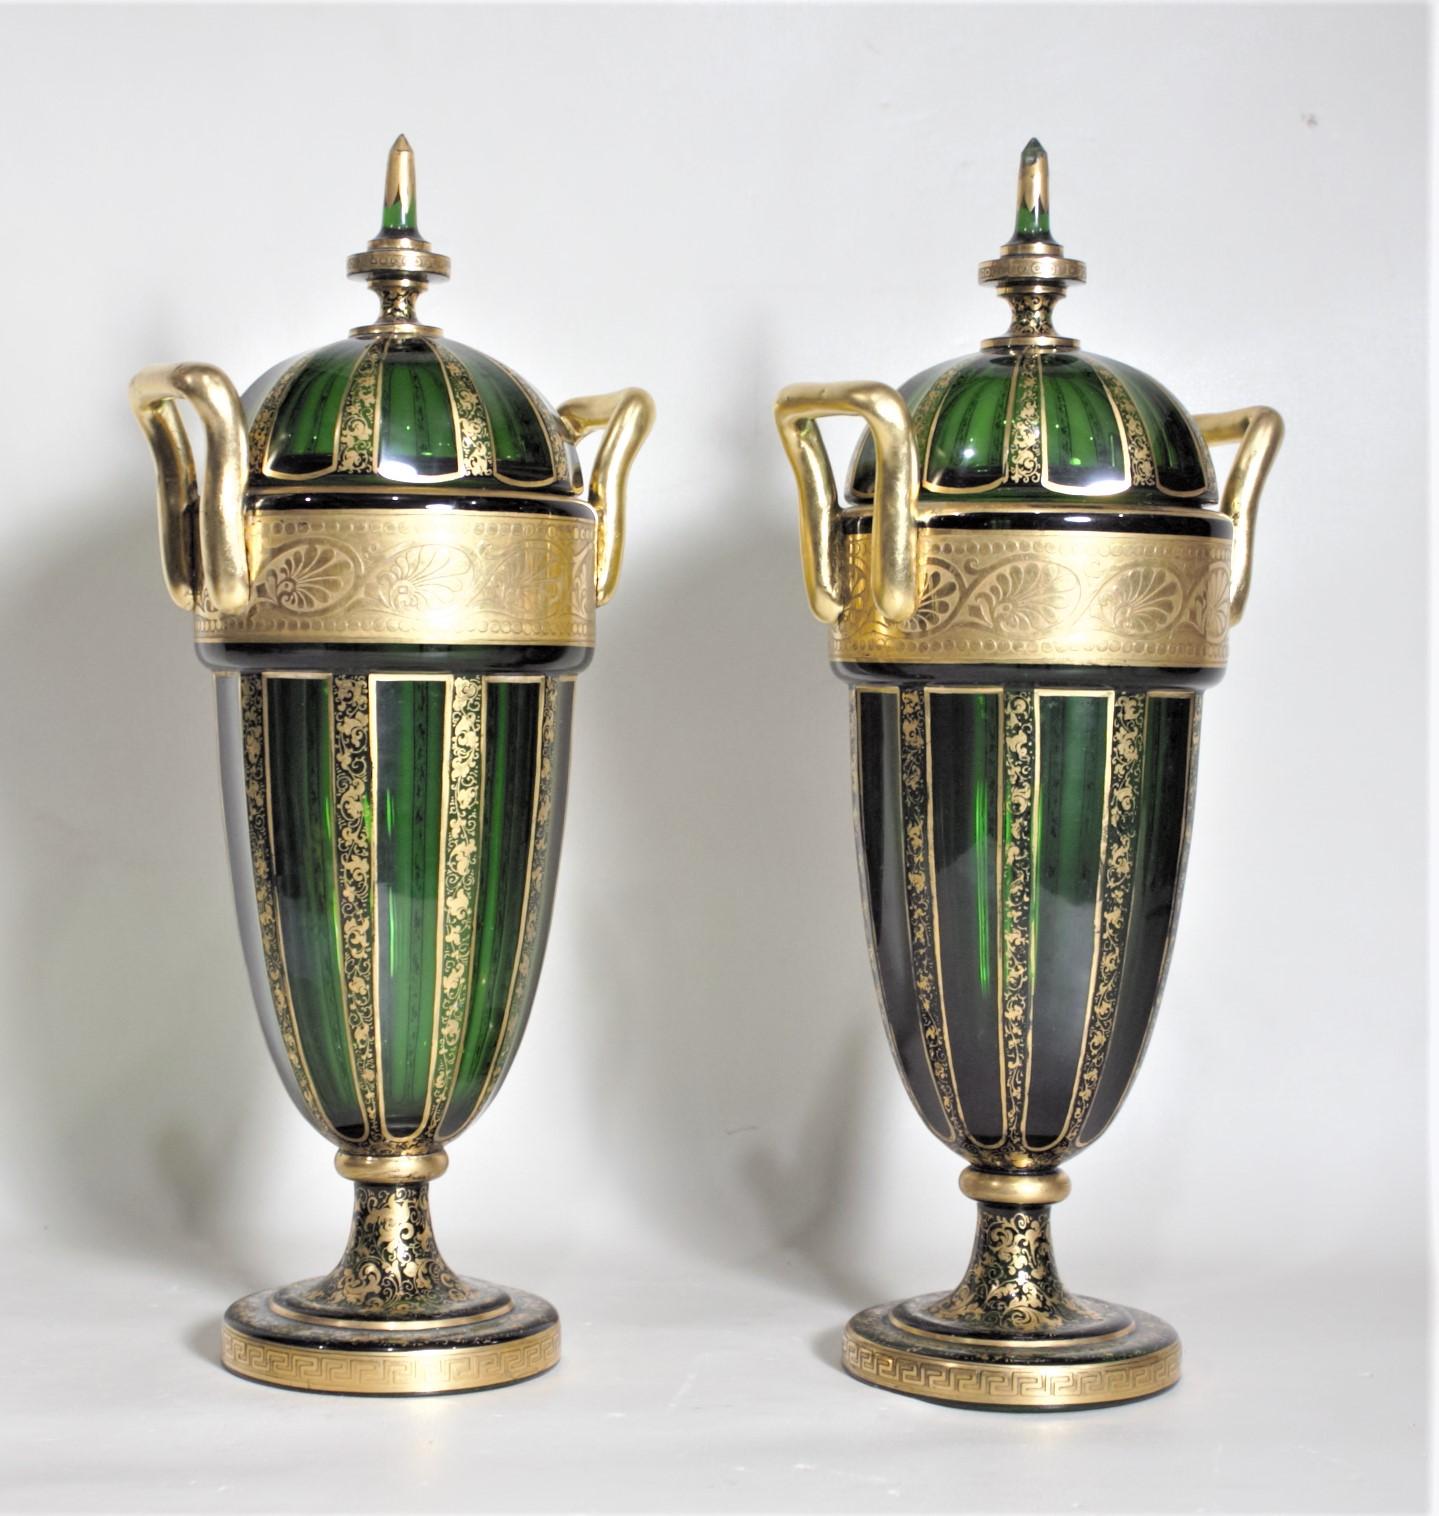 19th Century Pair of Antique Green Bohemian Covered Glass Urns with Heavy Gilt Decoration For Sale